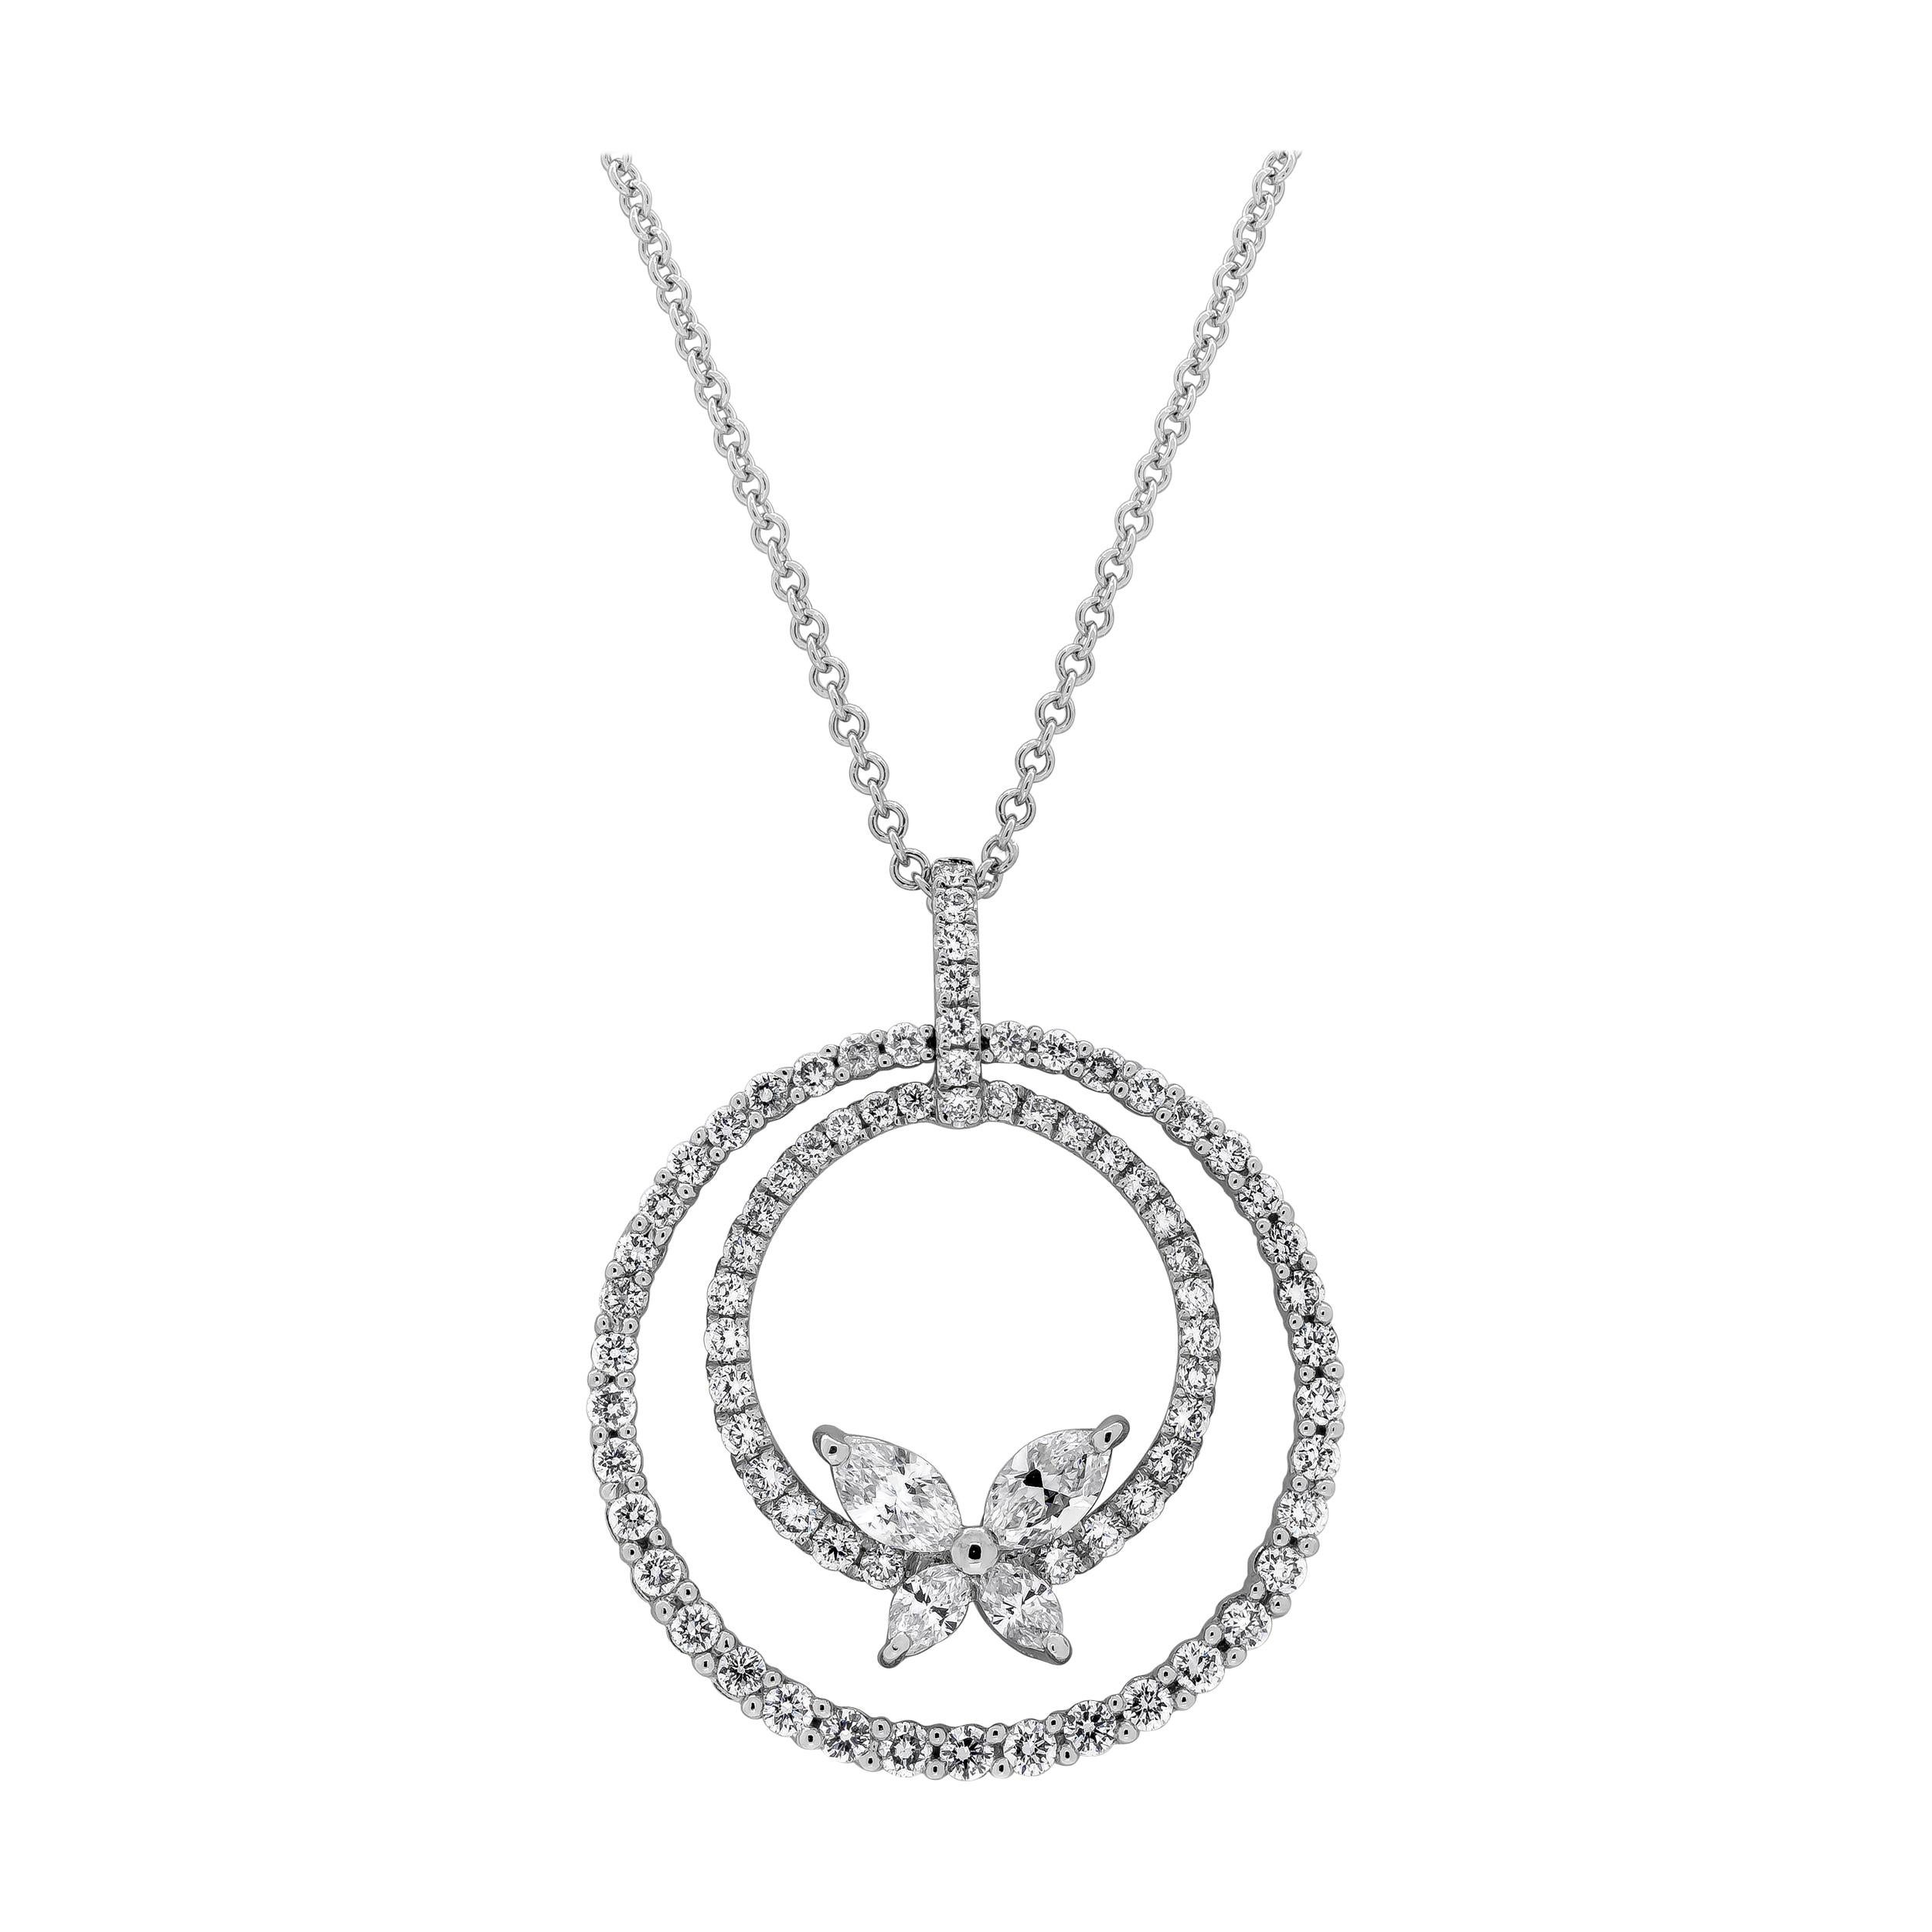 Roman Malakov 1.40 Carats Total Round and Marquis Cut Diamonds Pendant Necklace For Sale